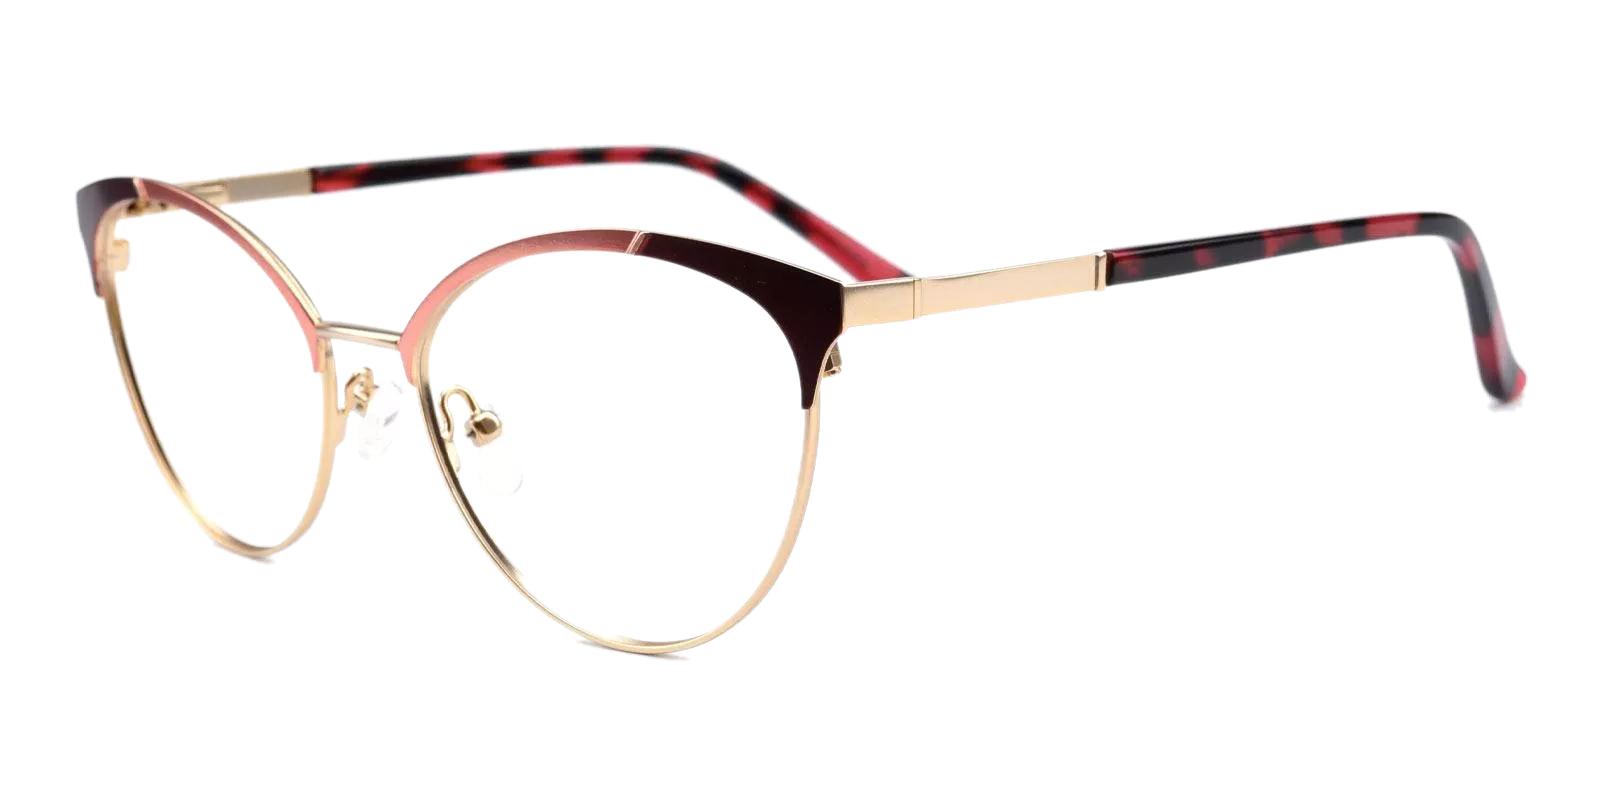 Huxley Red Metal Eyeglasses , Fashion , SpringHinges , NosePads Frames from ABBE Glasses